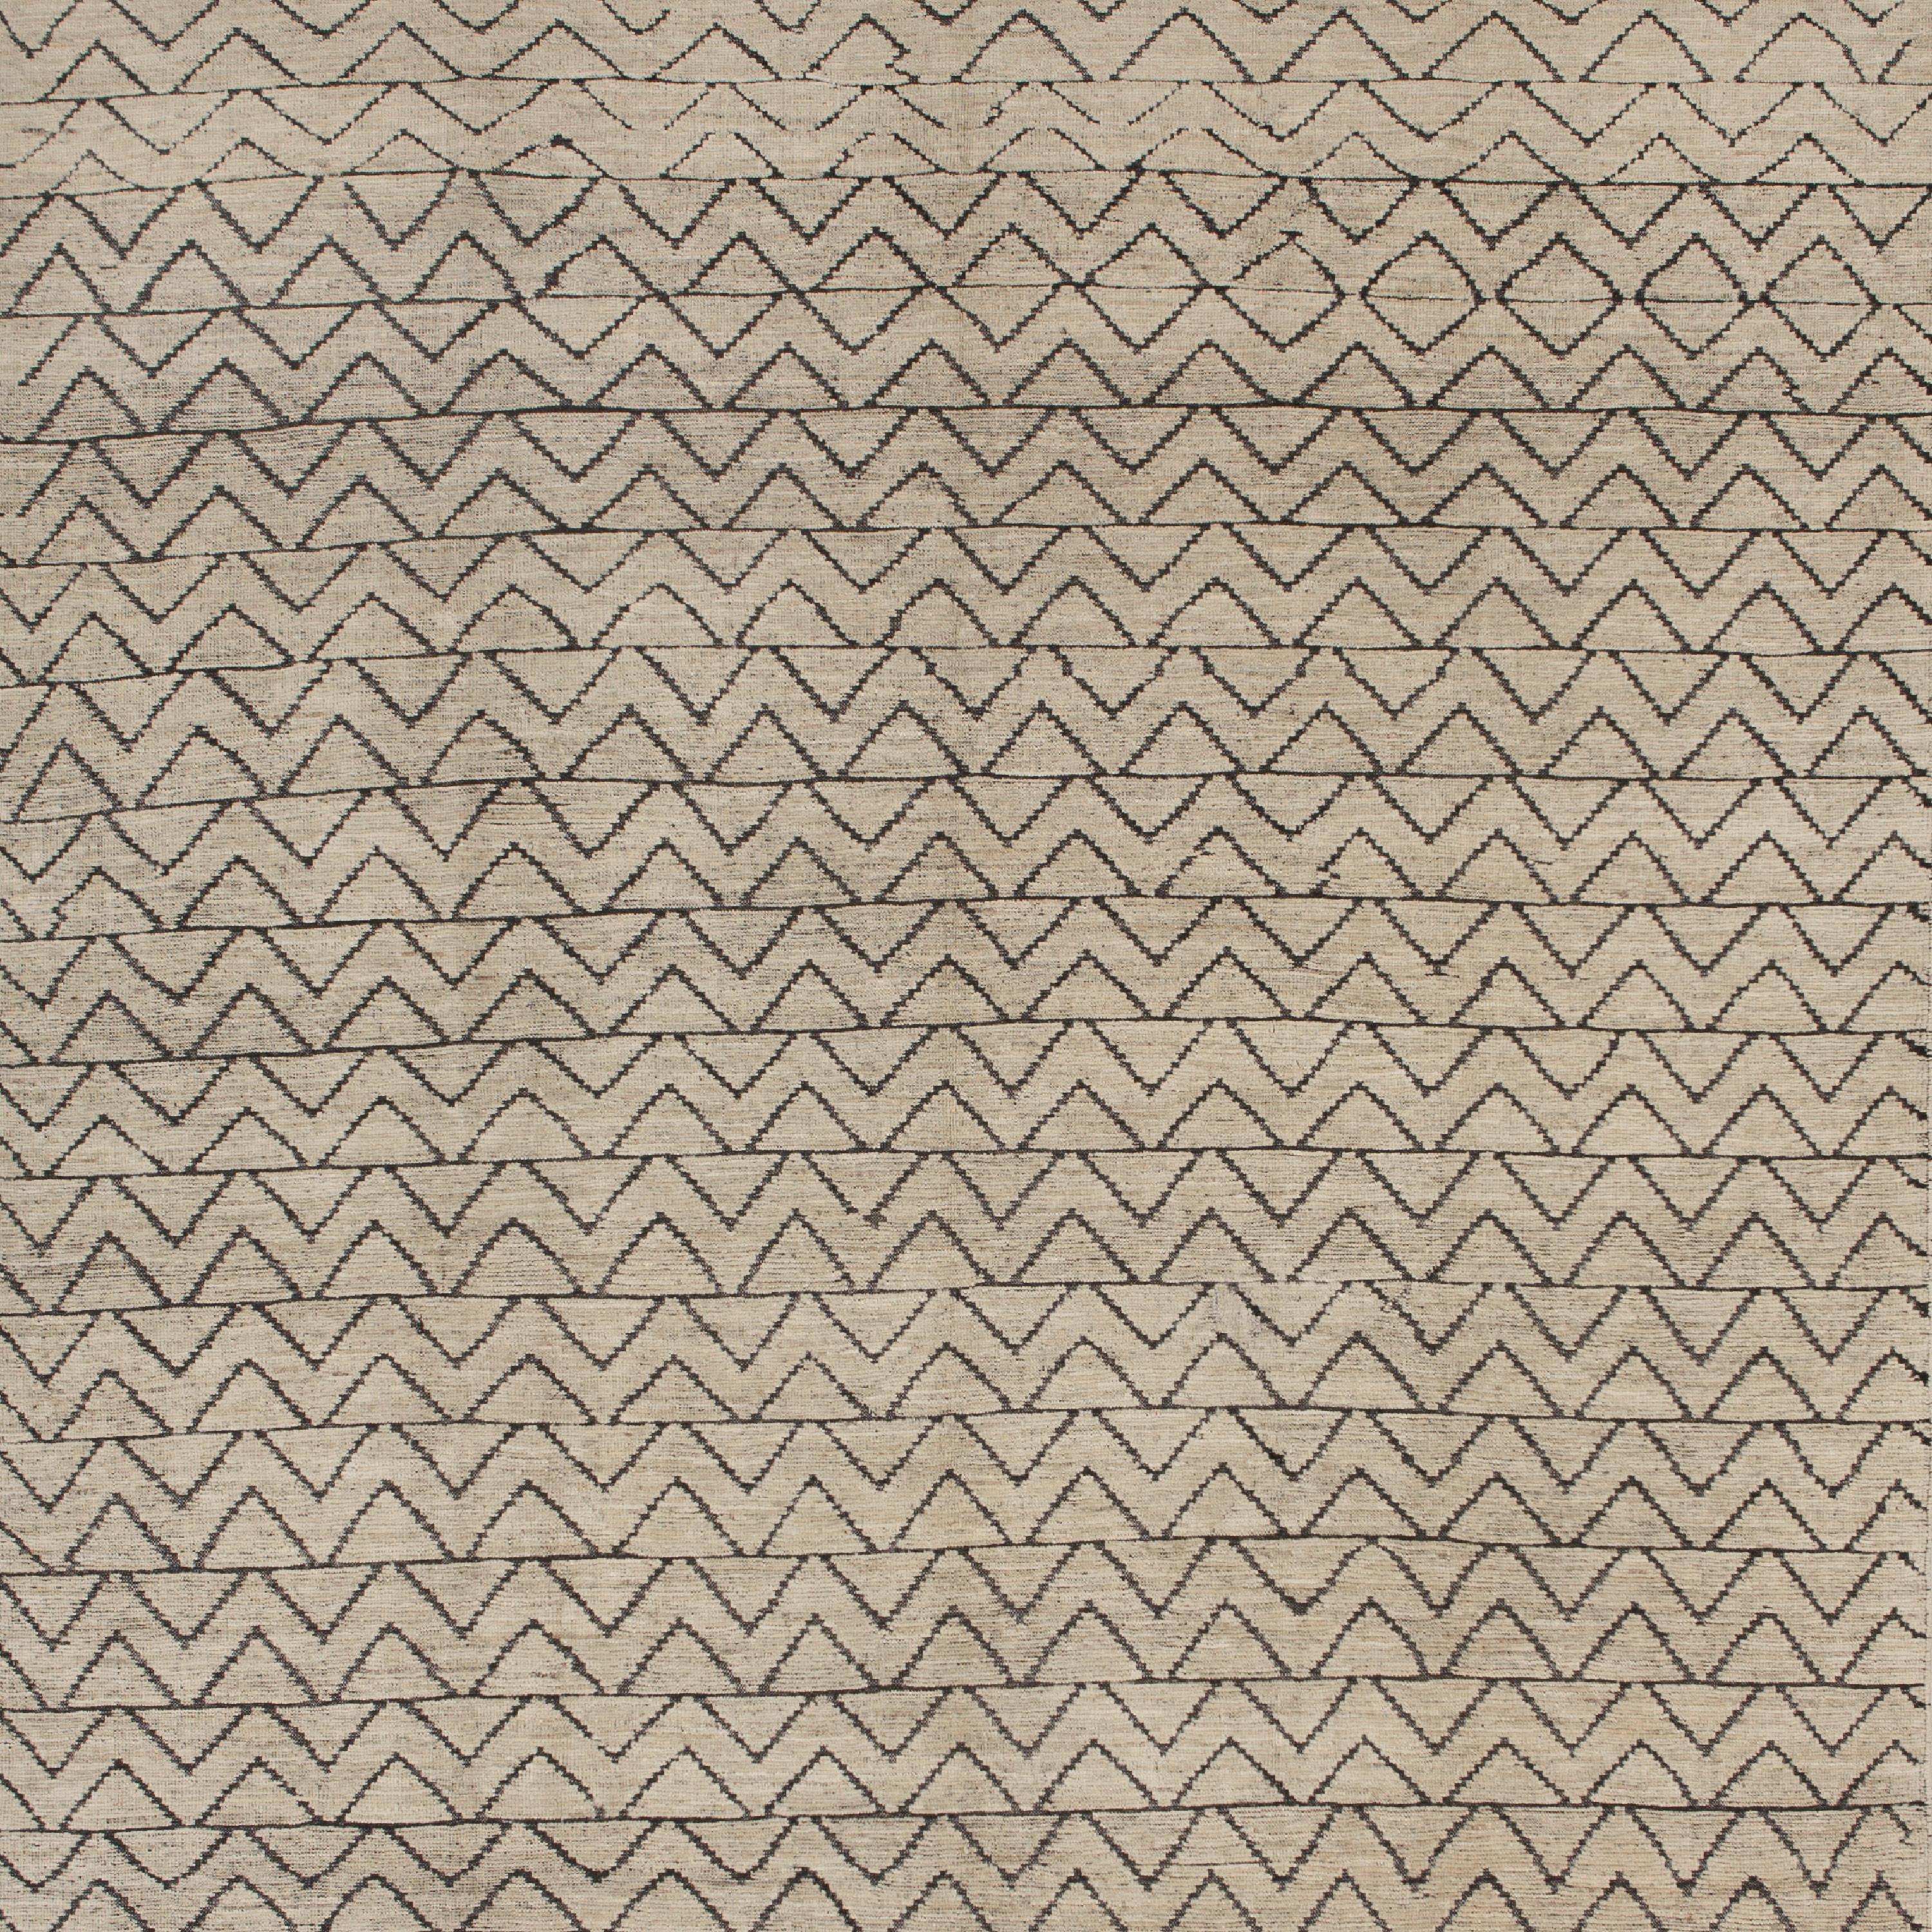 Inspired by the grounding foundations of Earth's natural colors and pure materials, this Zameen Cream and Black Geometric Wool Rug - 8'4